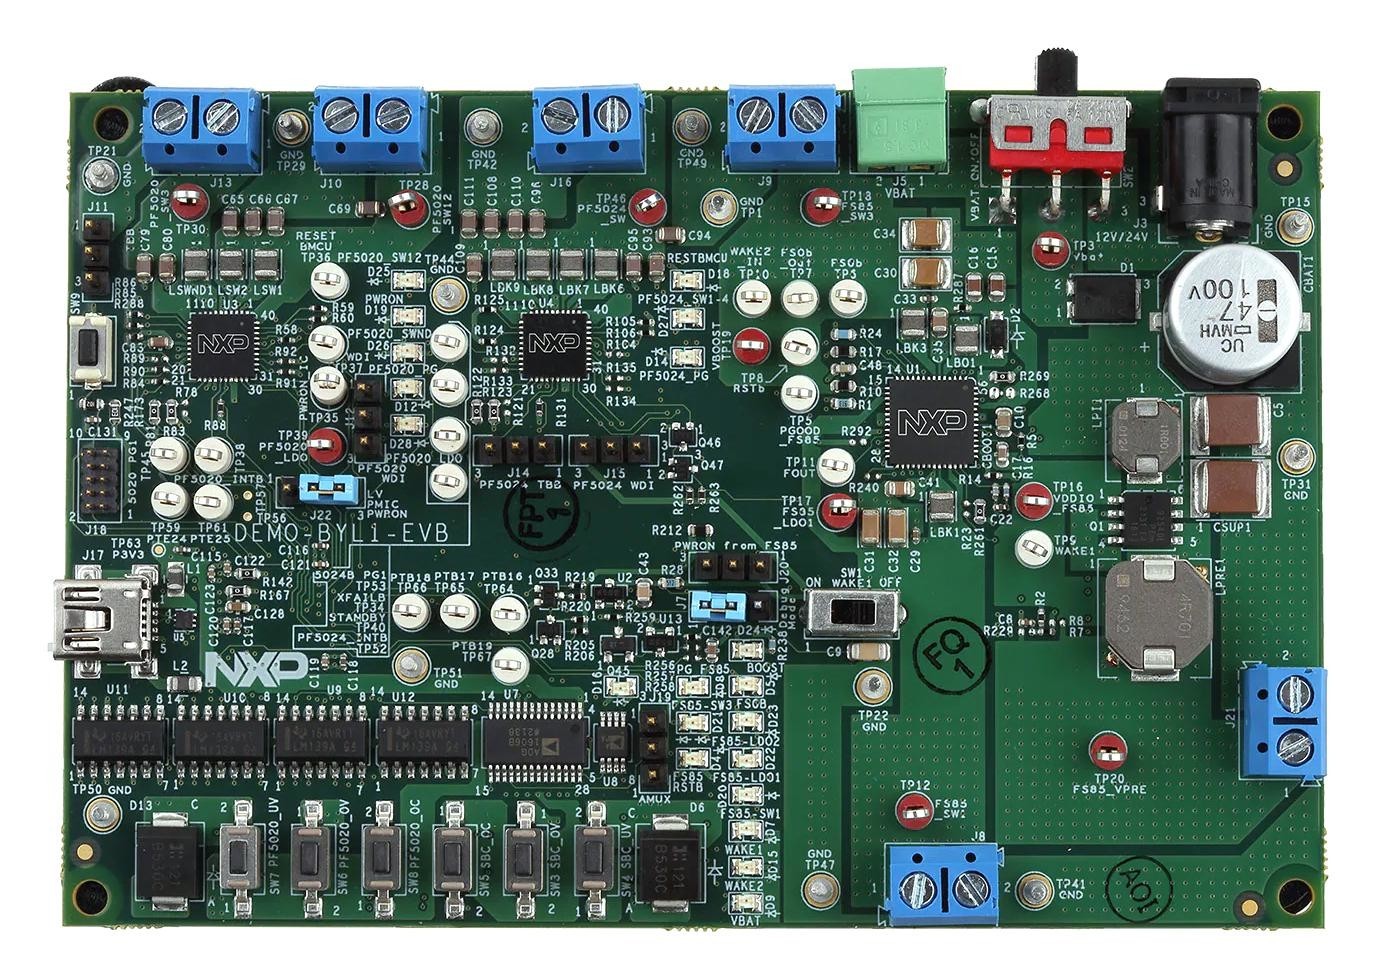 NXP Semiconductors Semiconductors Demo-Byl1-Evb Eval Board, Safety System Basis Chip